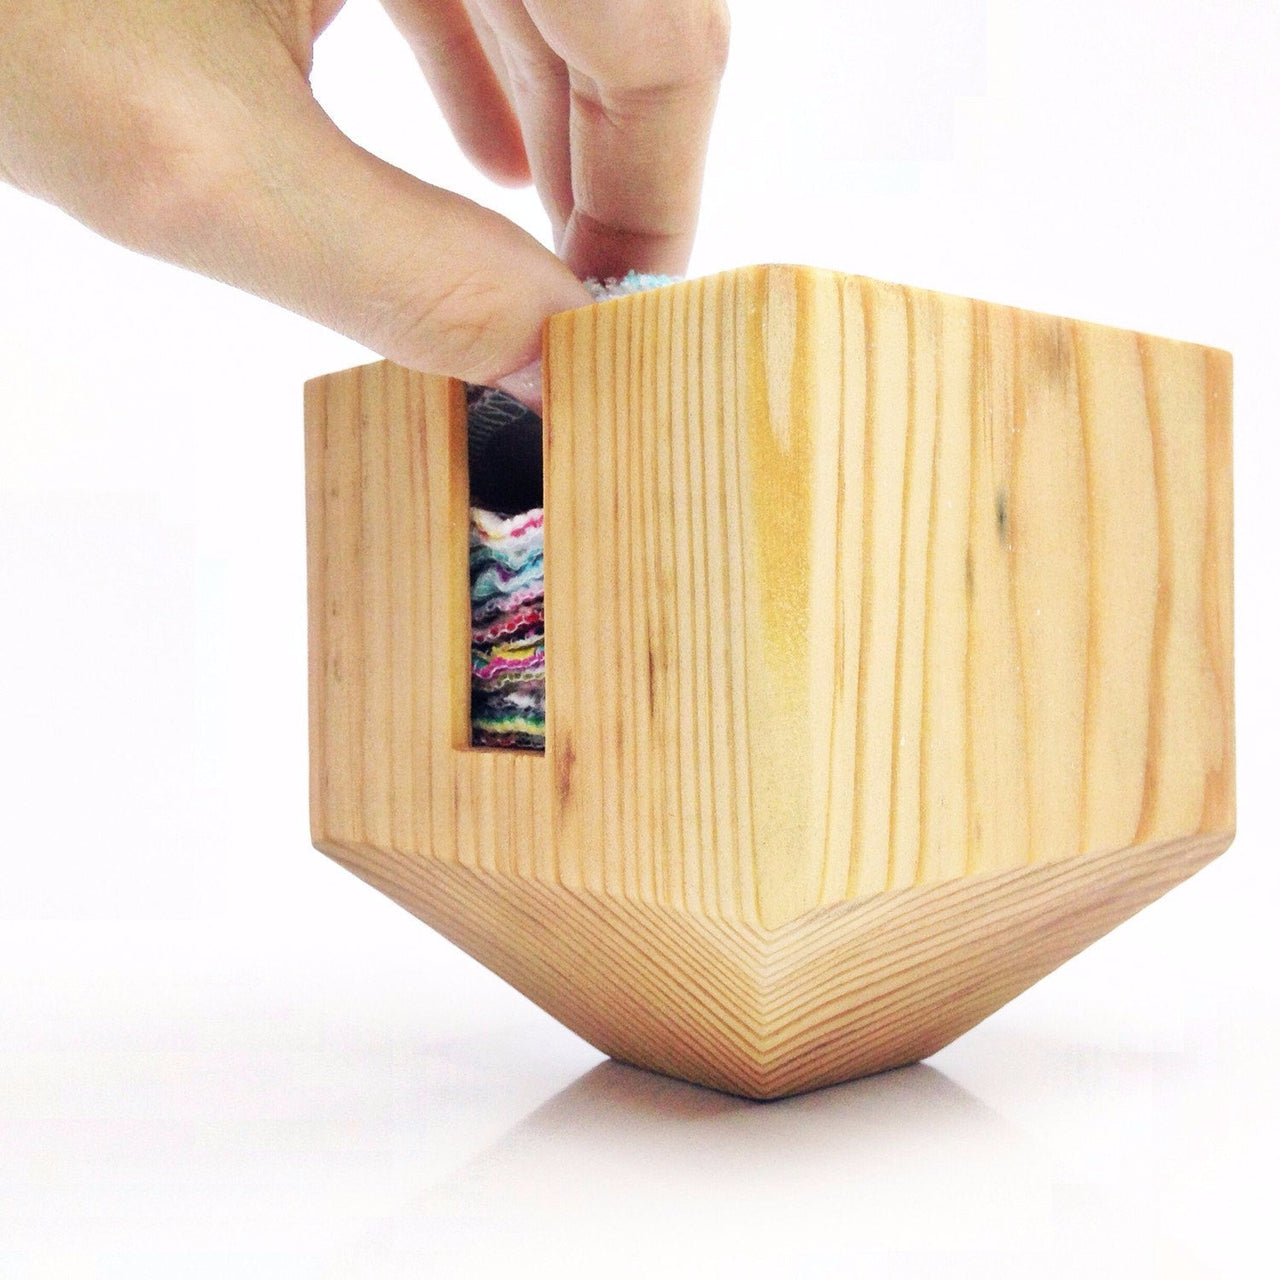 Facial Rounds Container: Wood